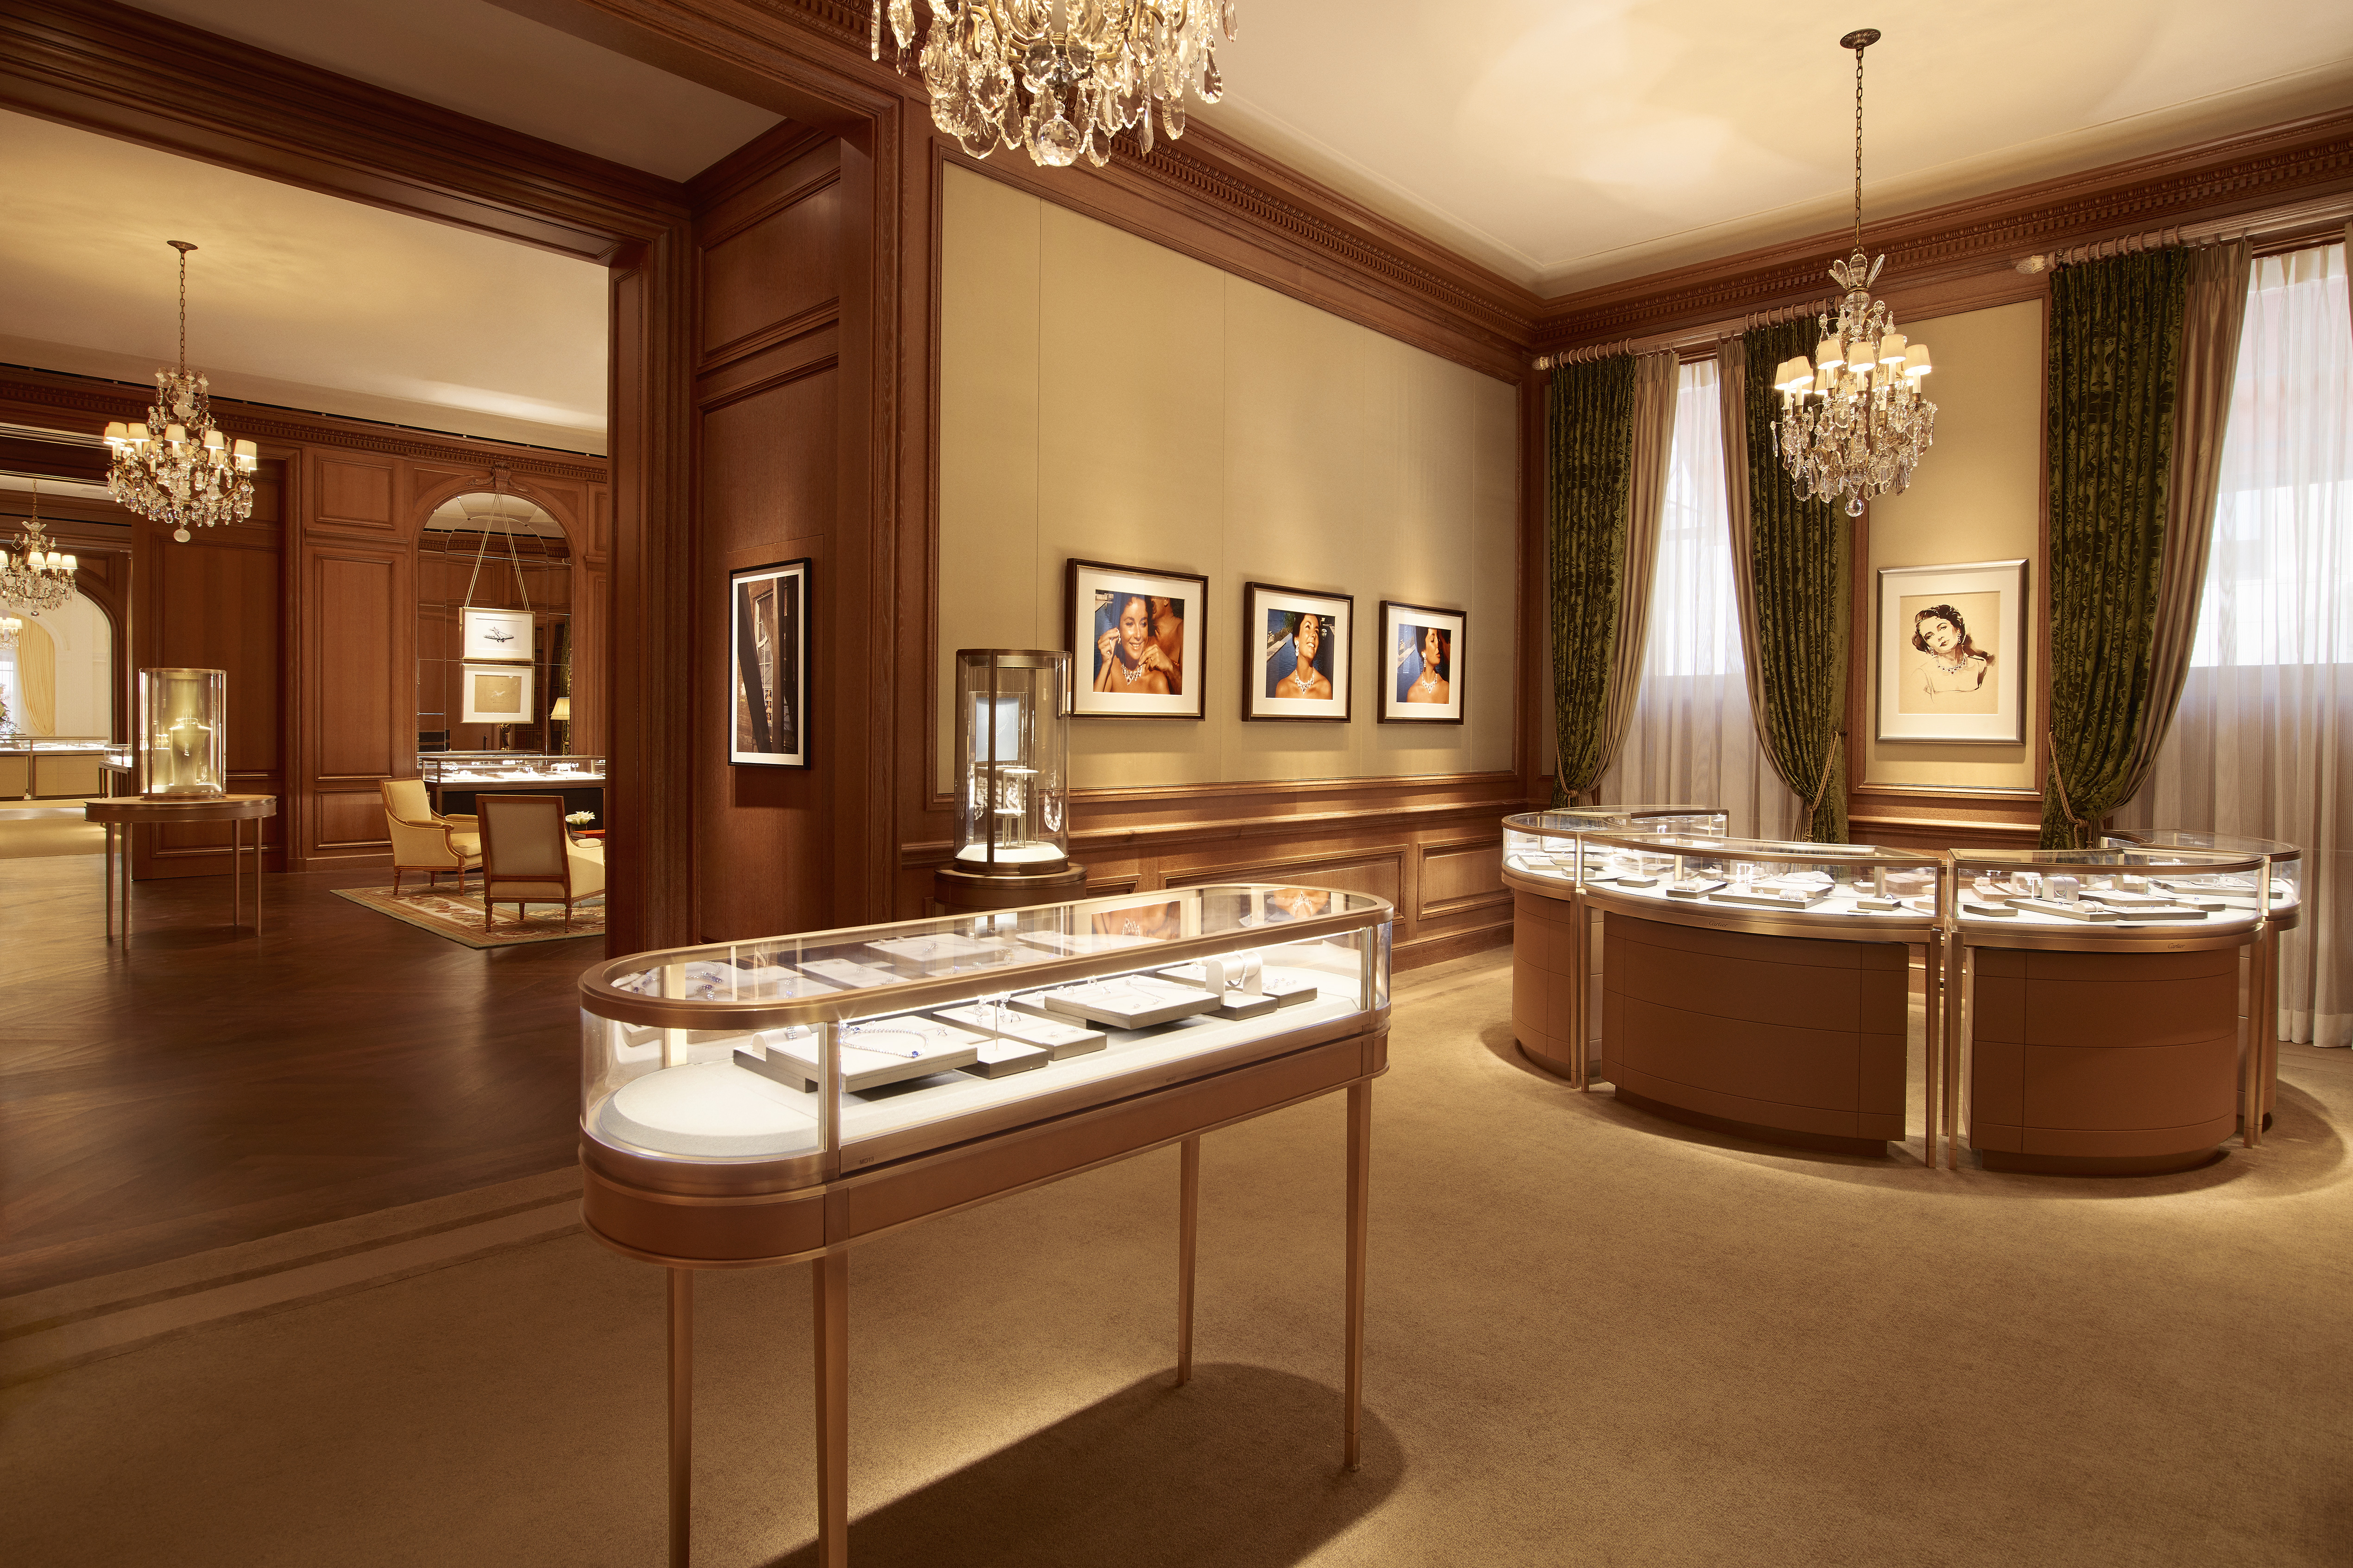 A First Look Inside the Cartier Mansion - Photos of the Cartier Mansion